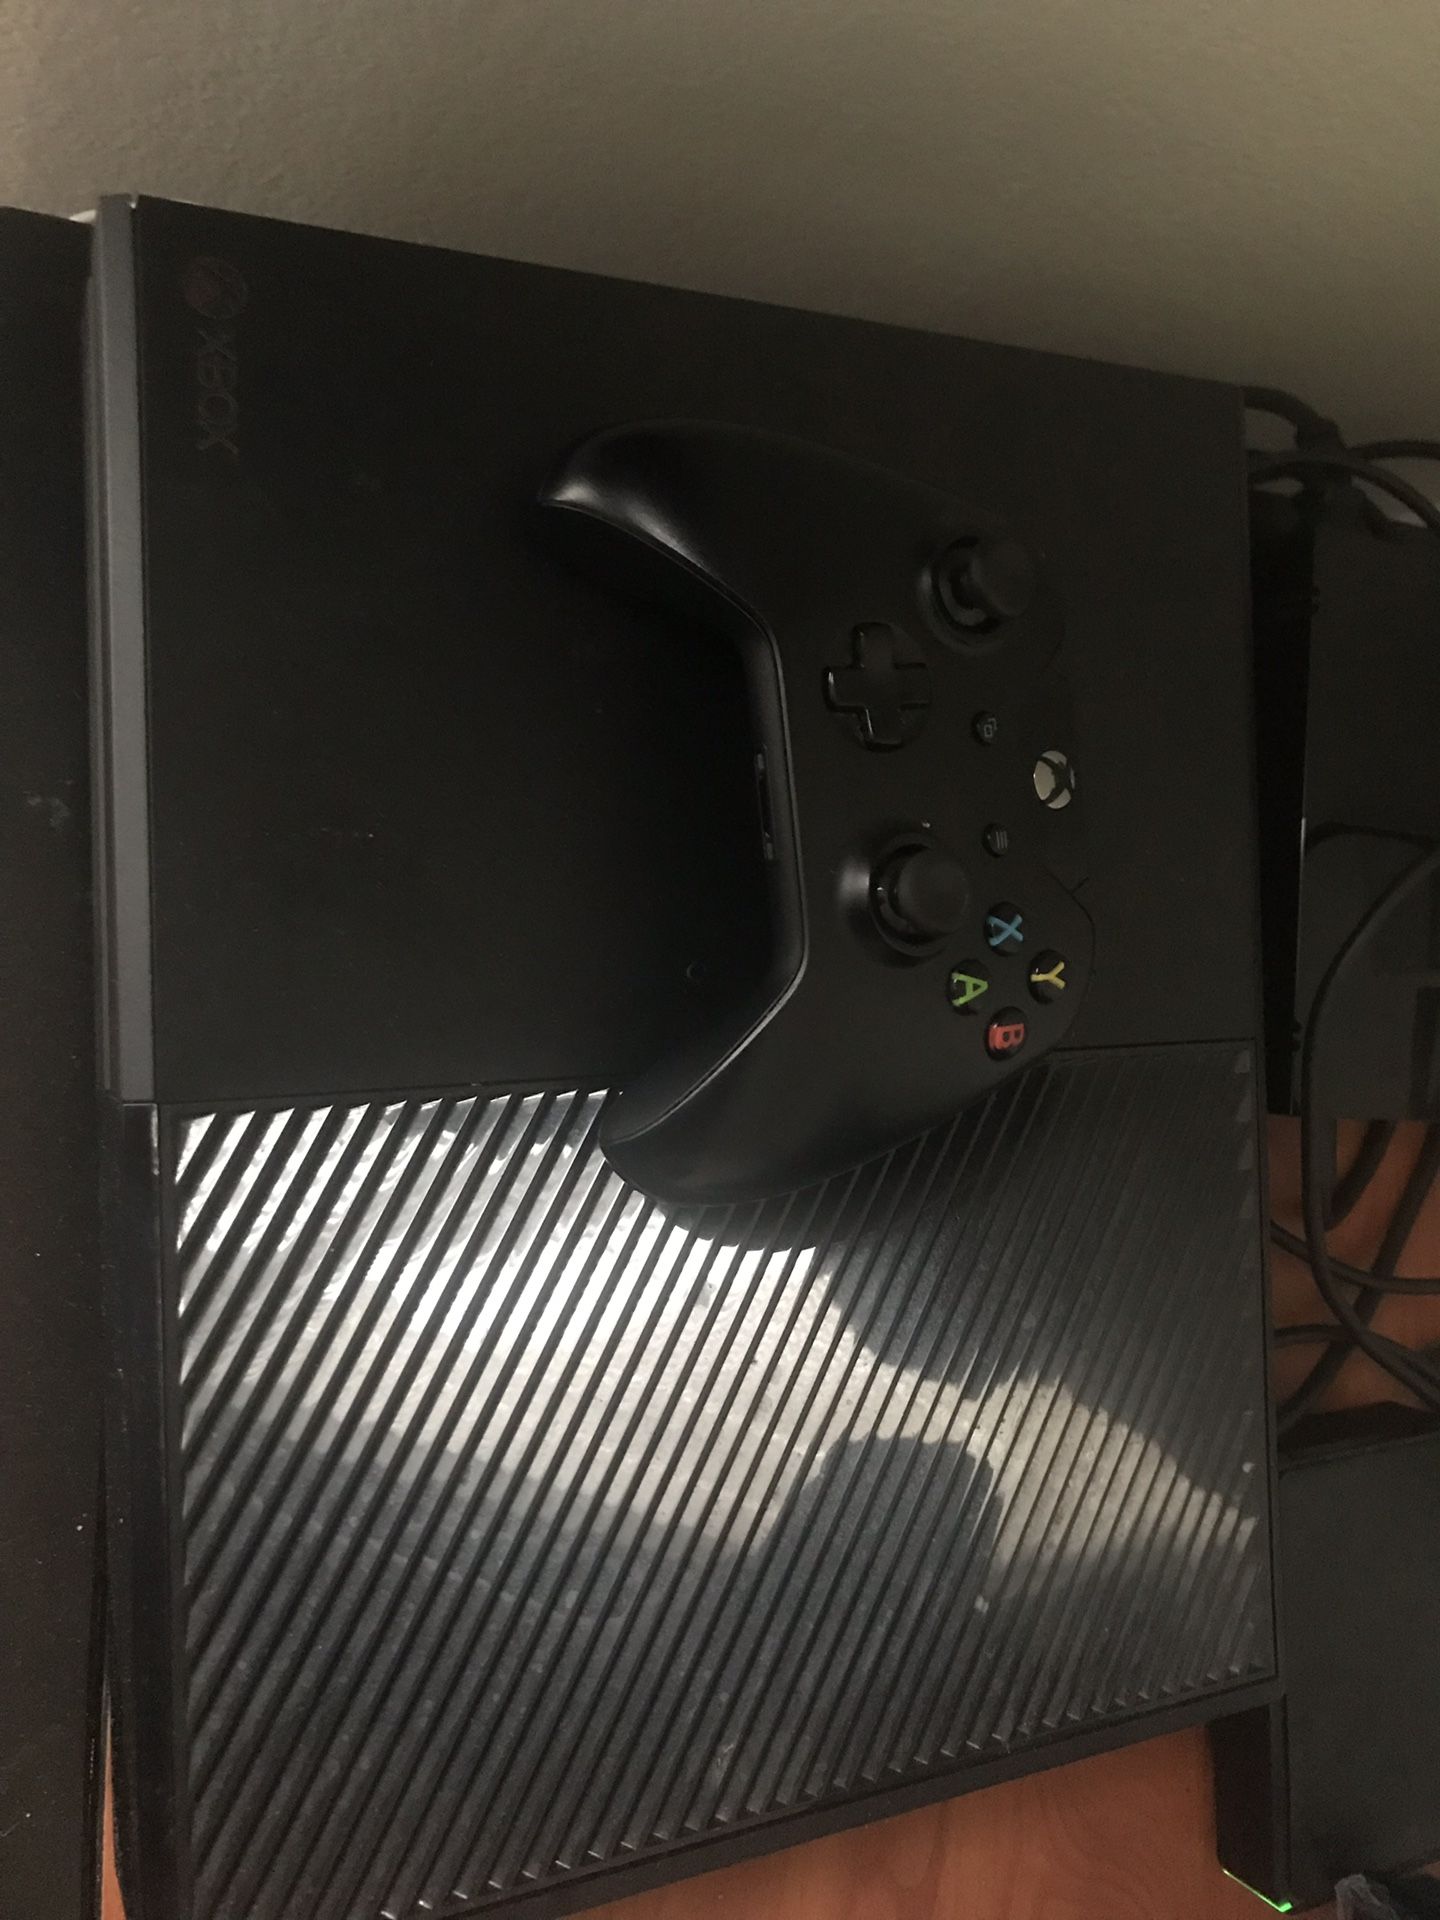 Xbox One 500 GB/ comes with 32 inch TV